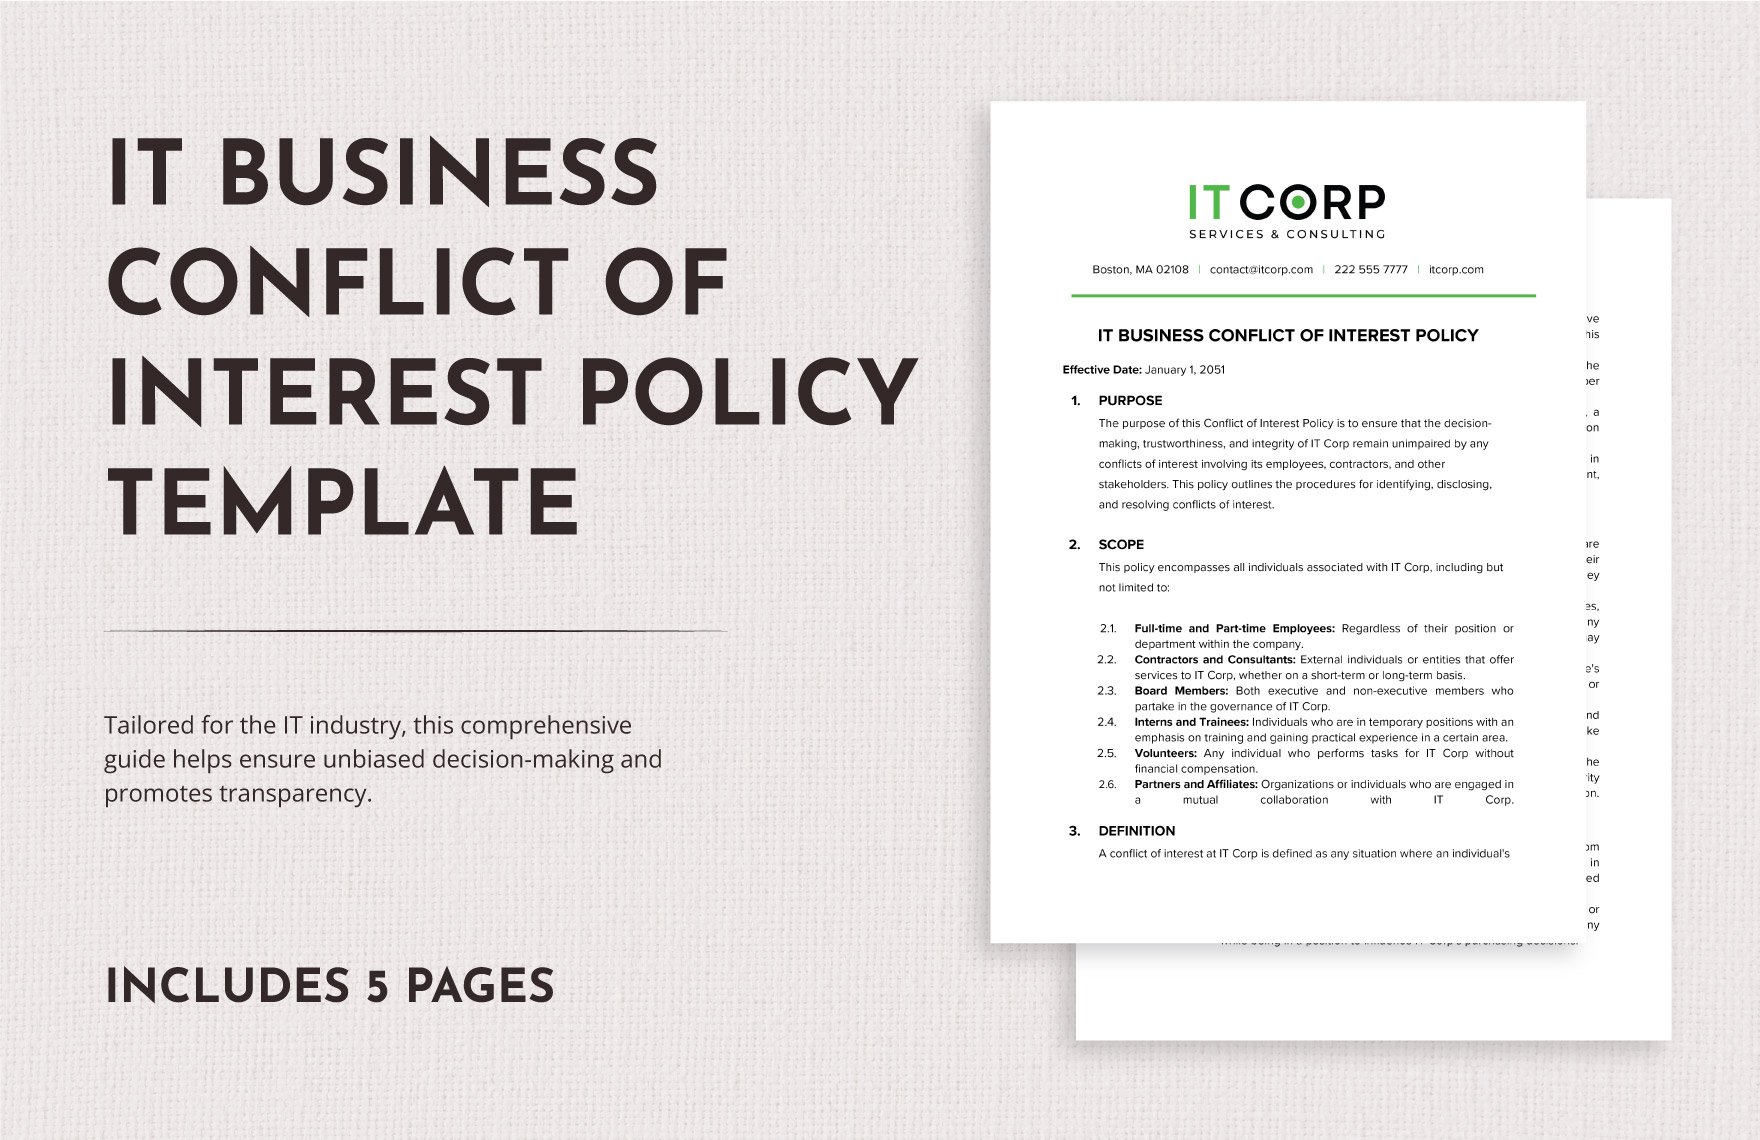 IT Business Conflict of Interest Policy Template in Word, Google Docs, PDF